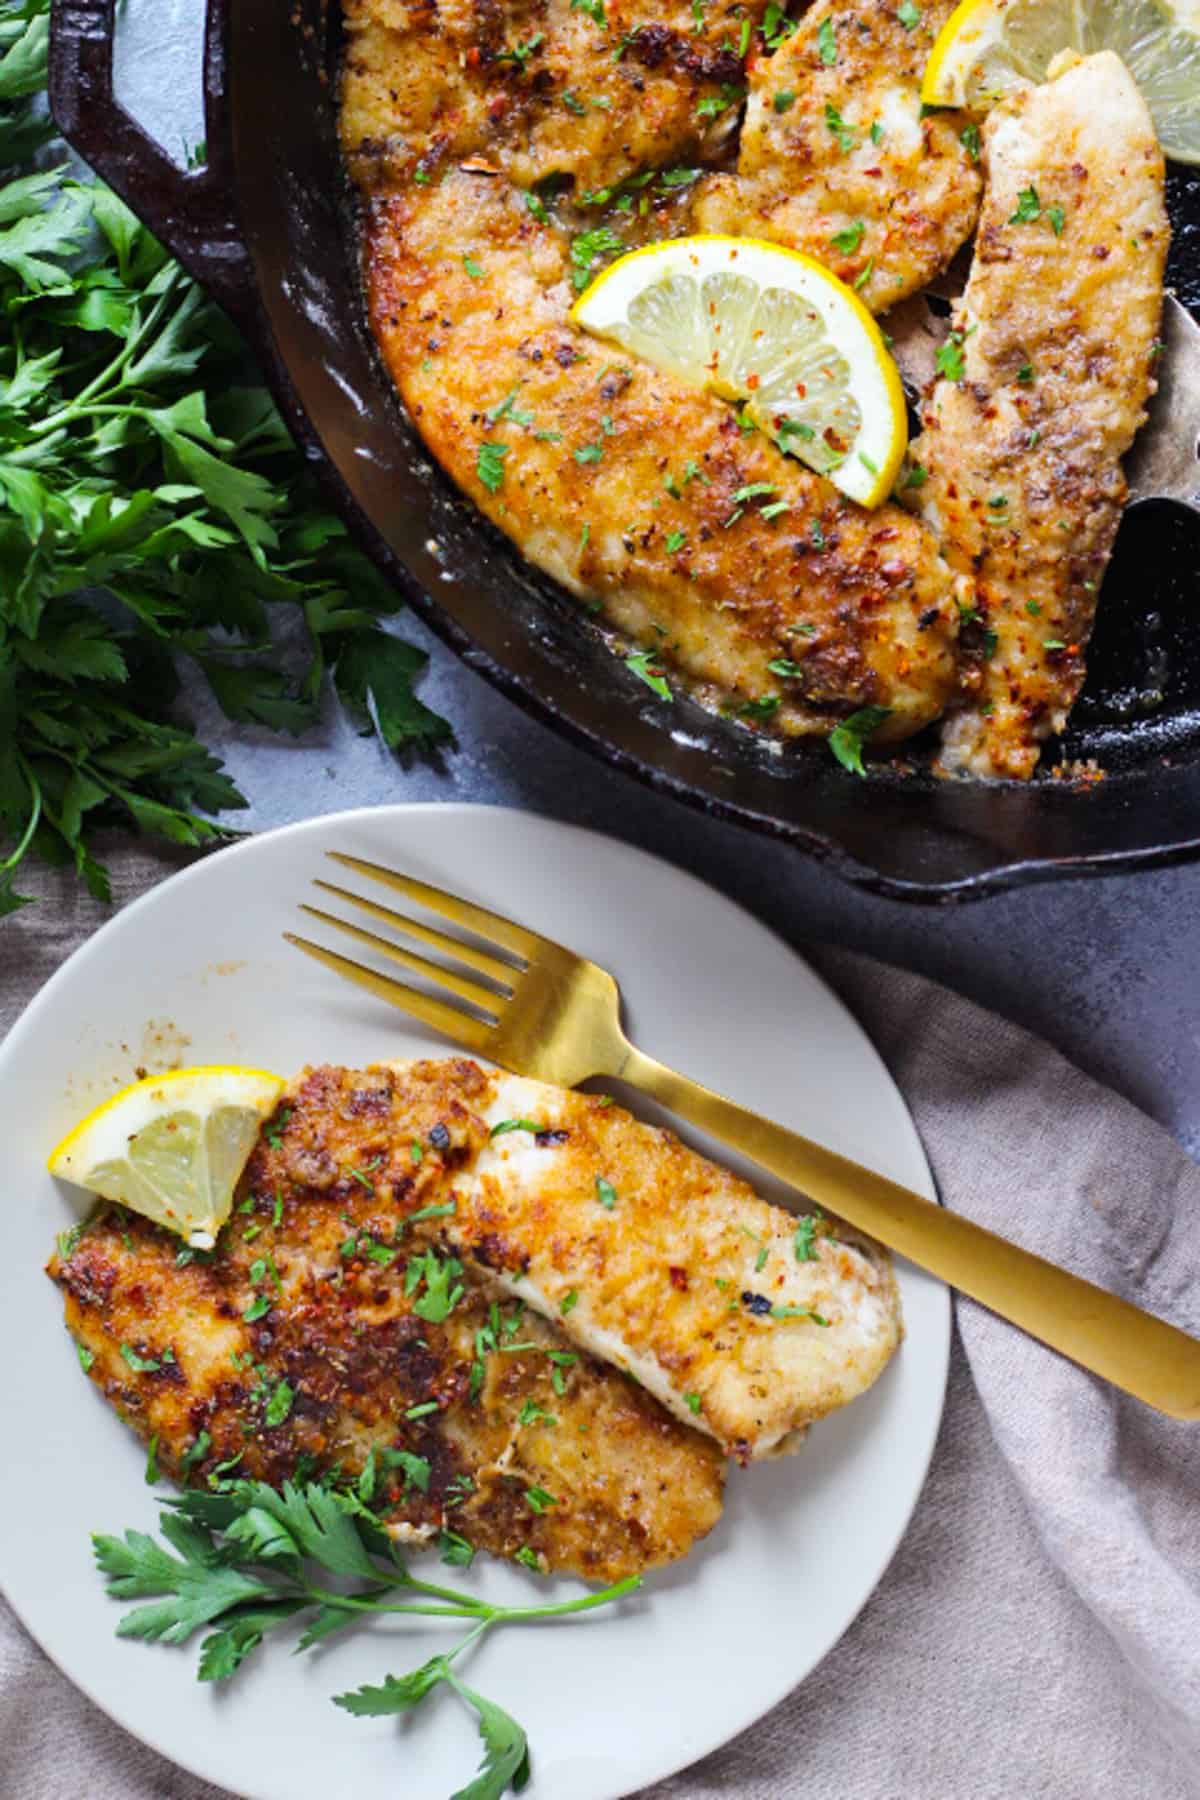 Ready in 30 minutes, this garlic lemon tilapia recipe makes the perfect dinner. This is one of the best tilapia recipes out there and it's so easy to make!
